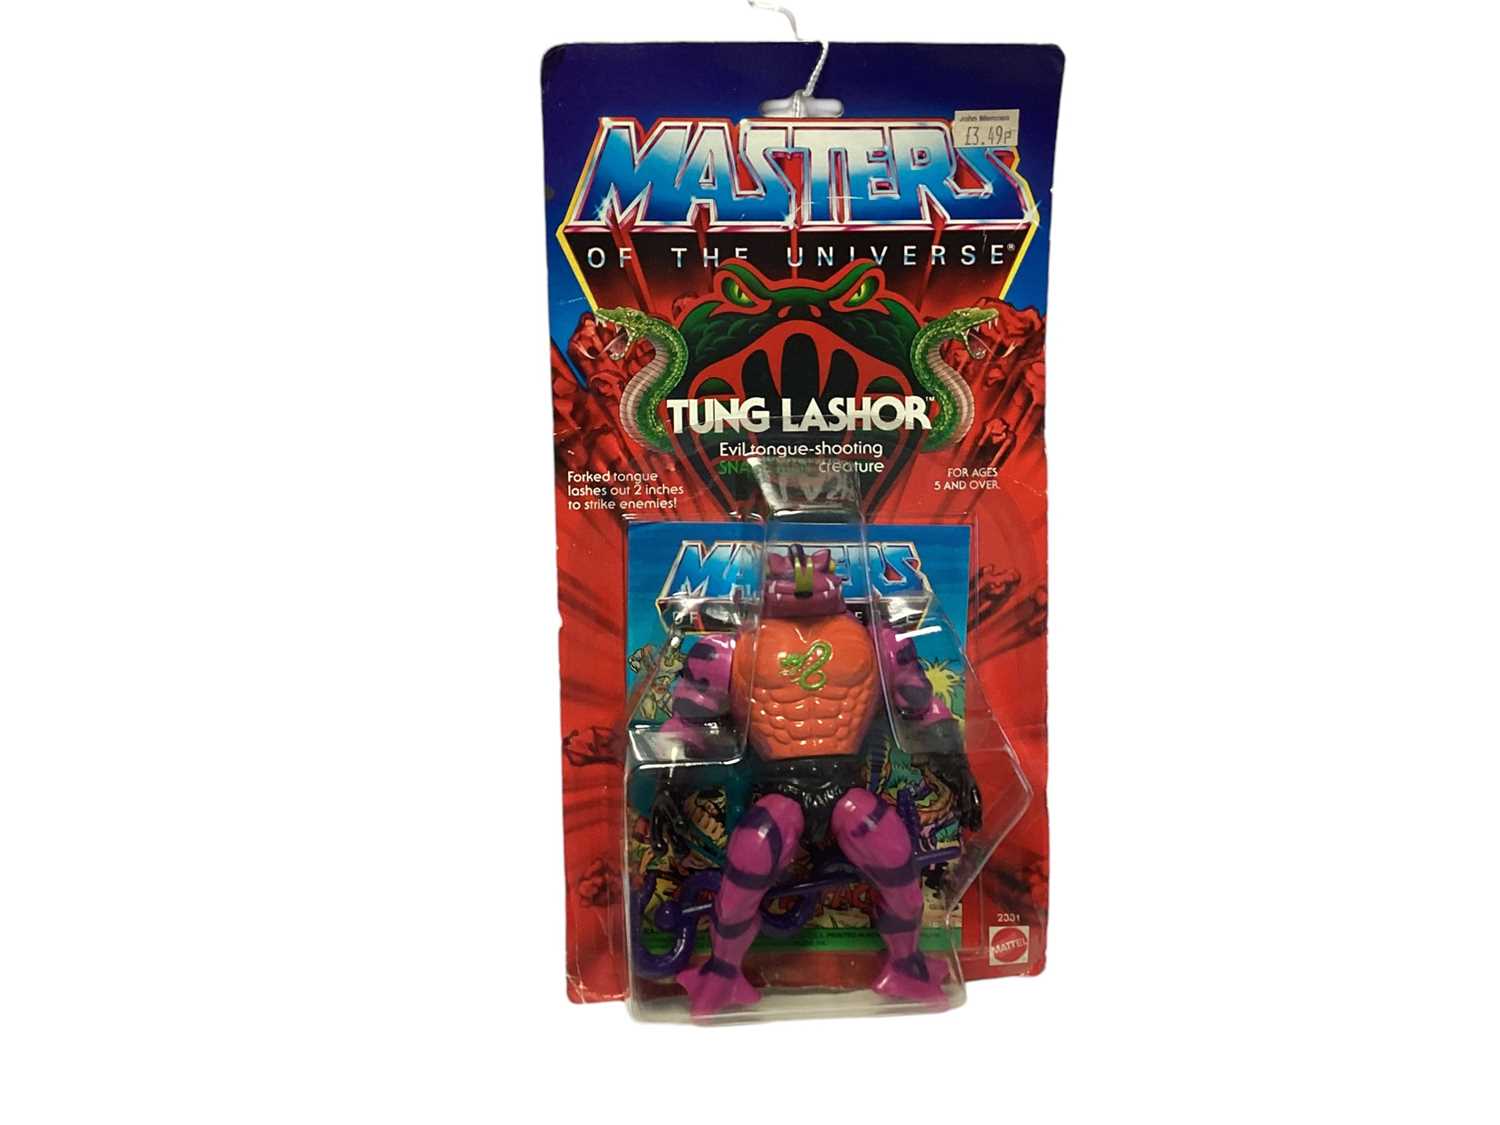 Mattel (c1985) Masters of the Universe Tung Lashor 5" action figure, on card (splitting to bottom ed